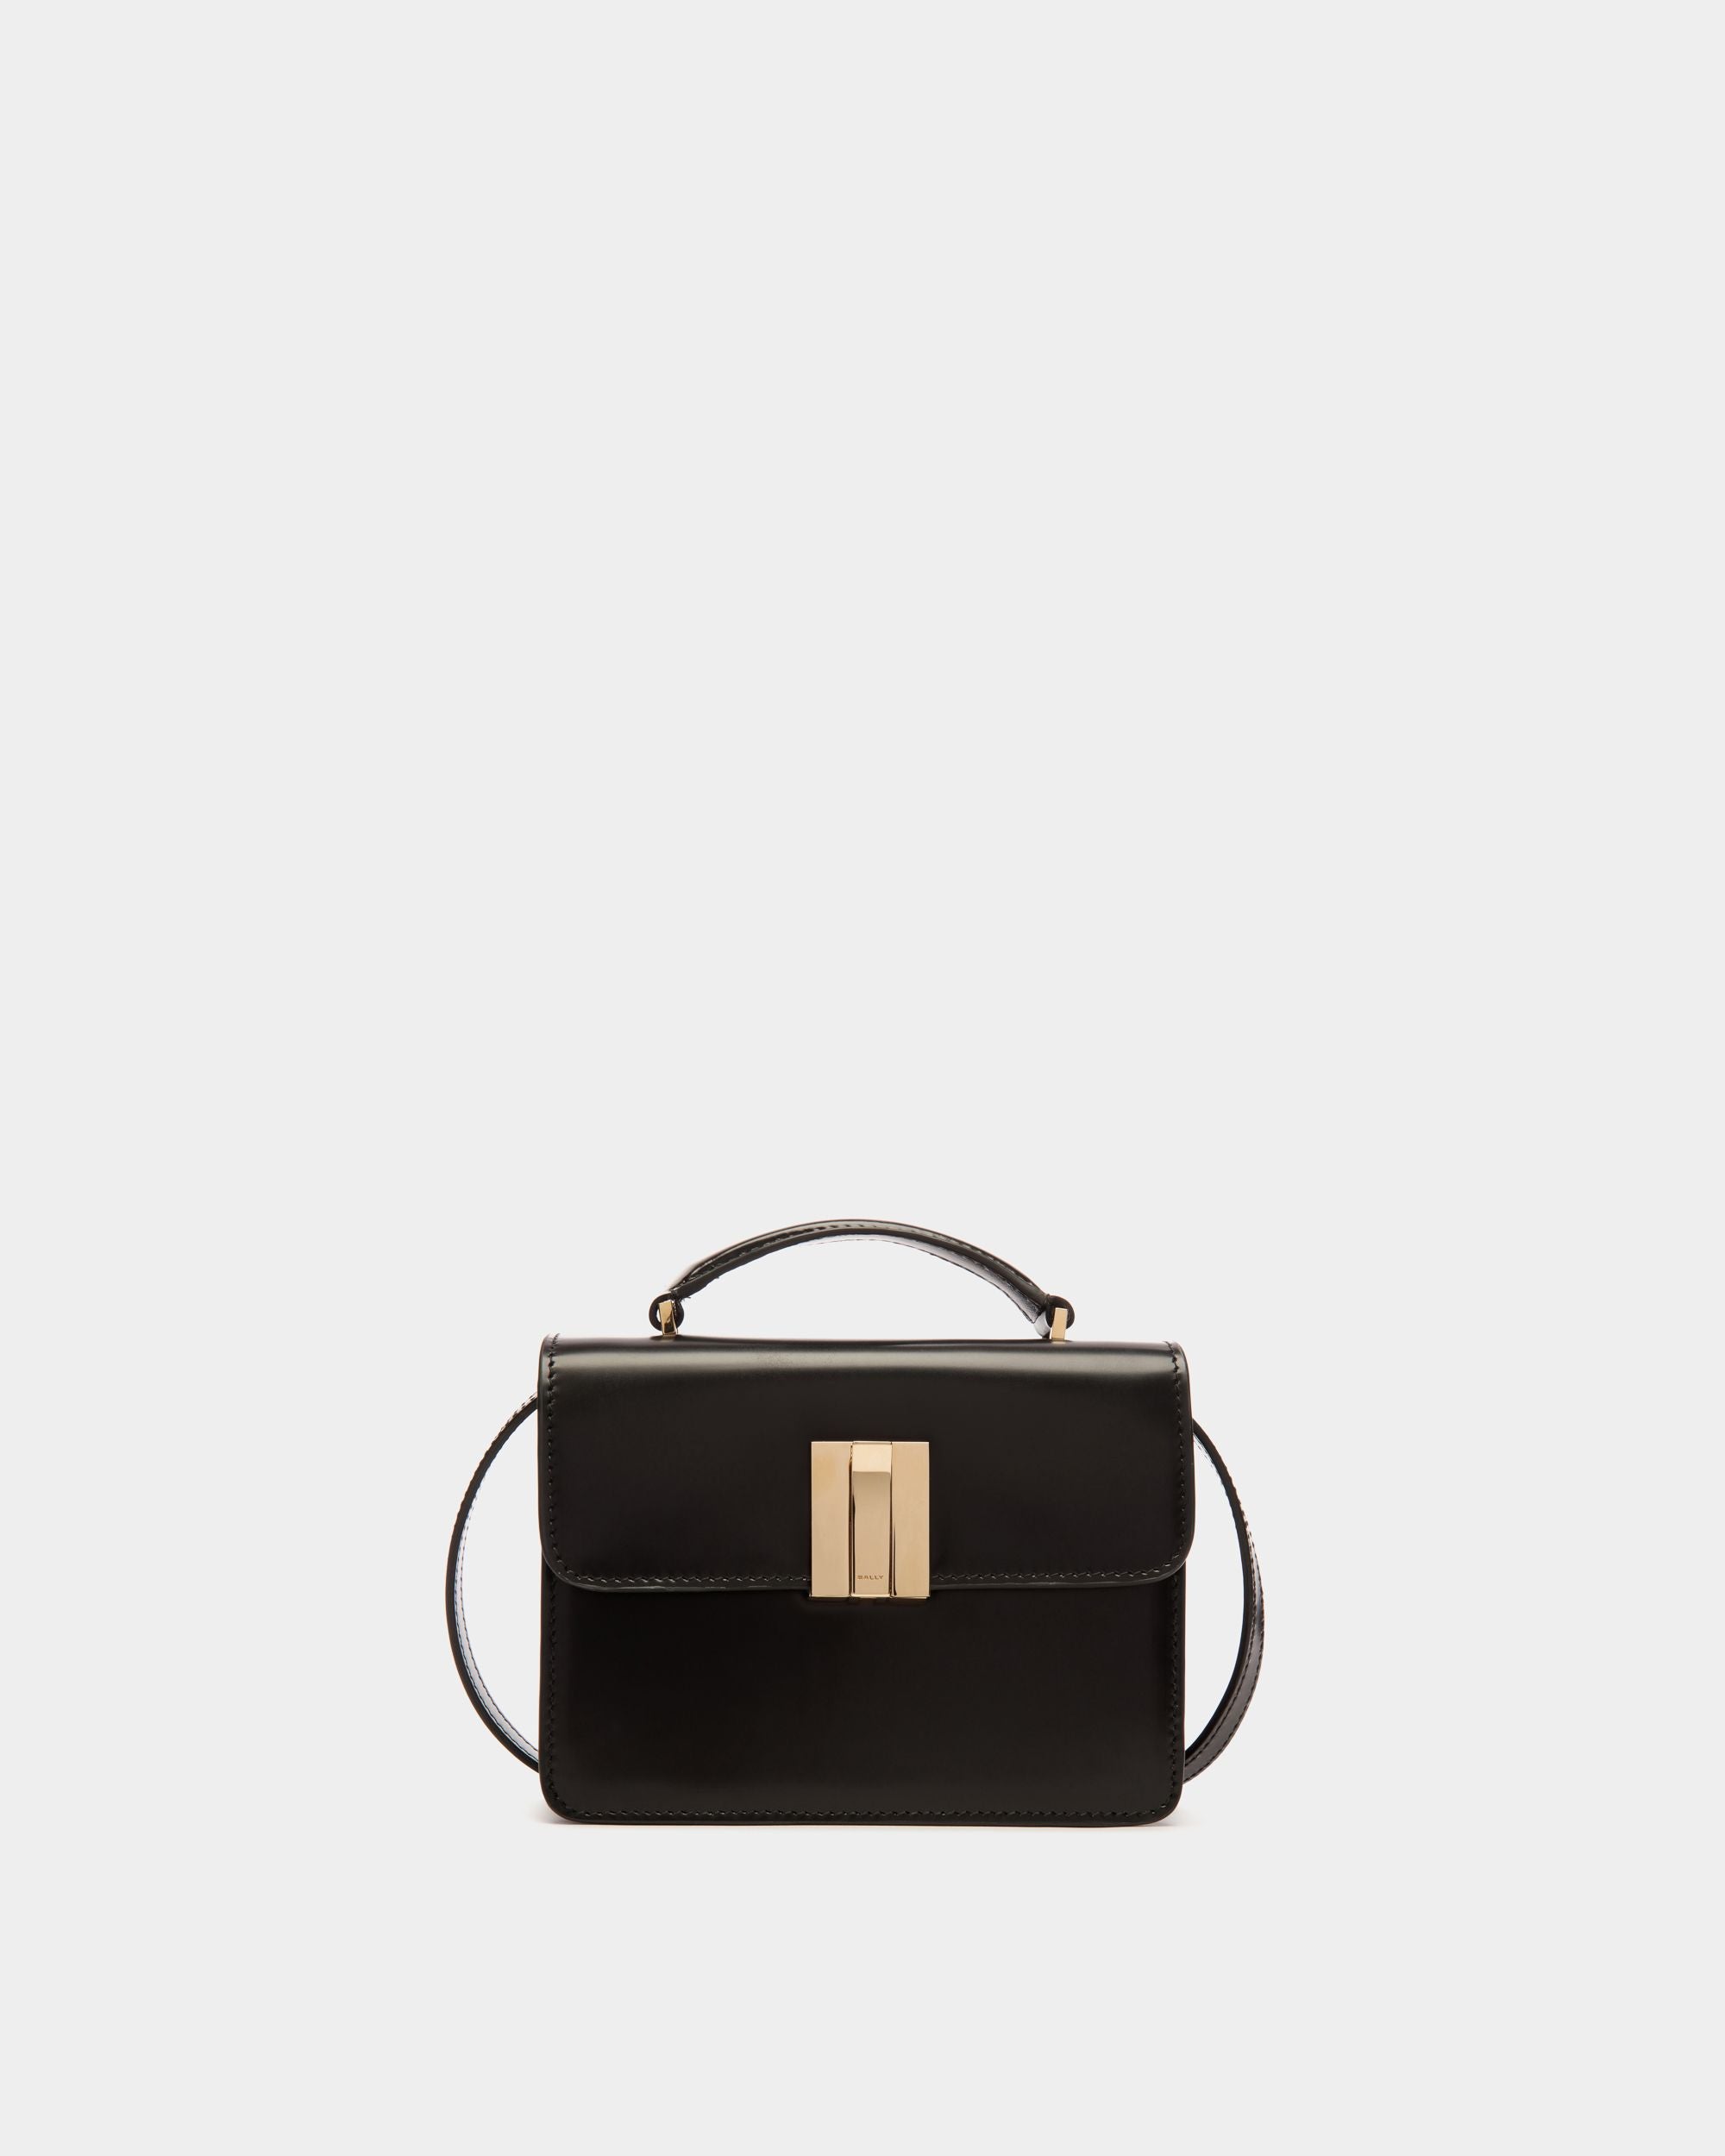 Women's Ollam Mini Top Handle Bag in Black Brushed Leather | Bally | Still Life Front